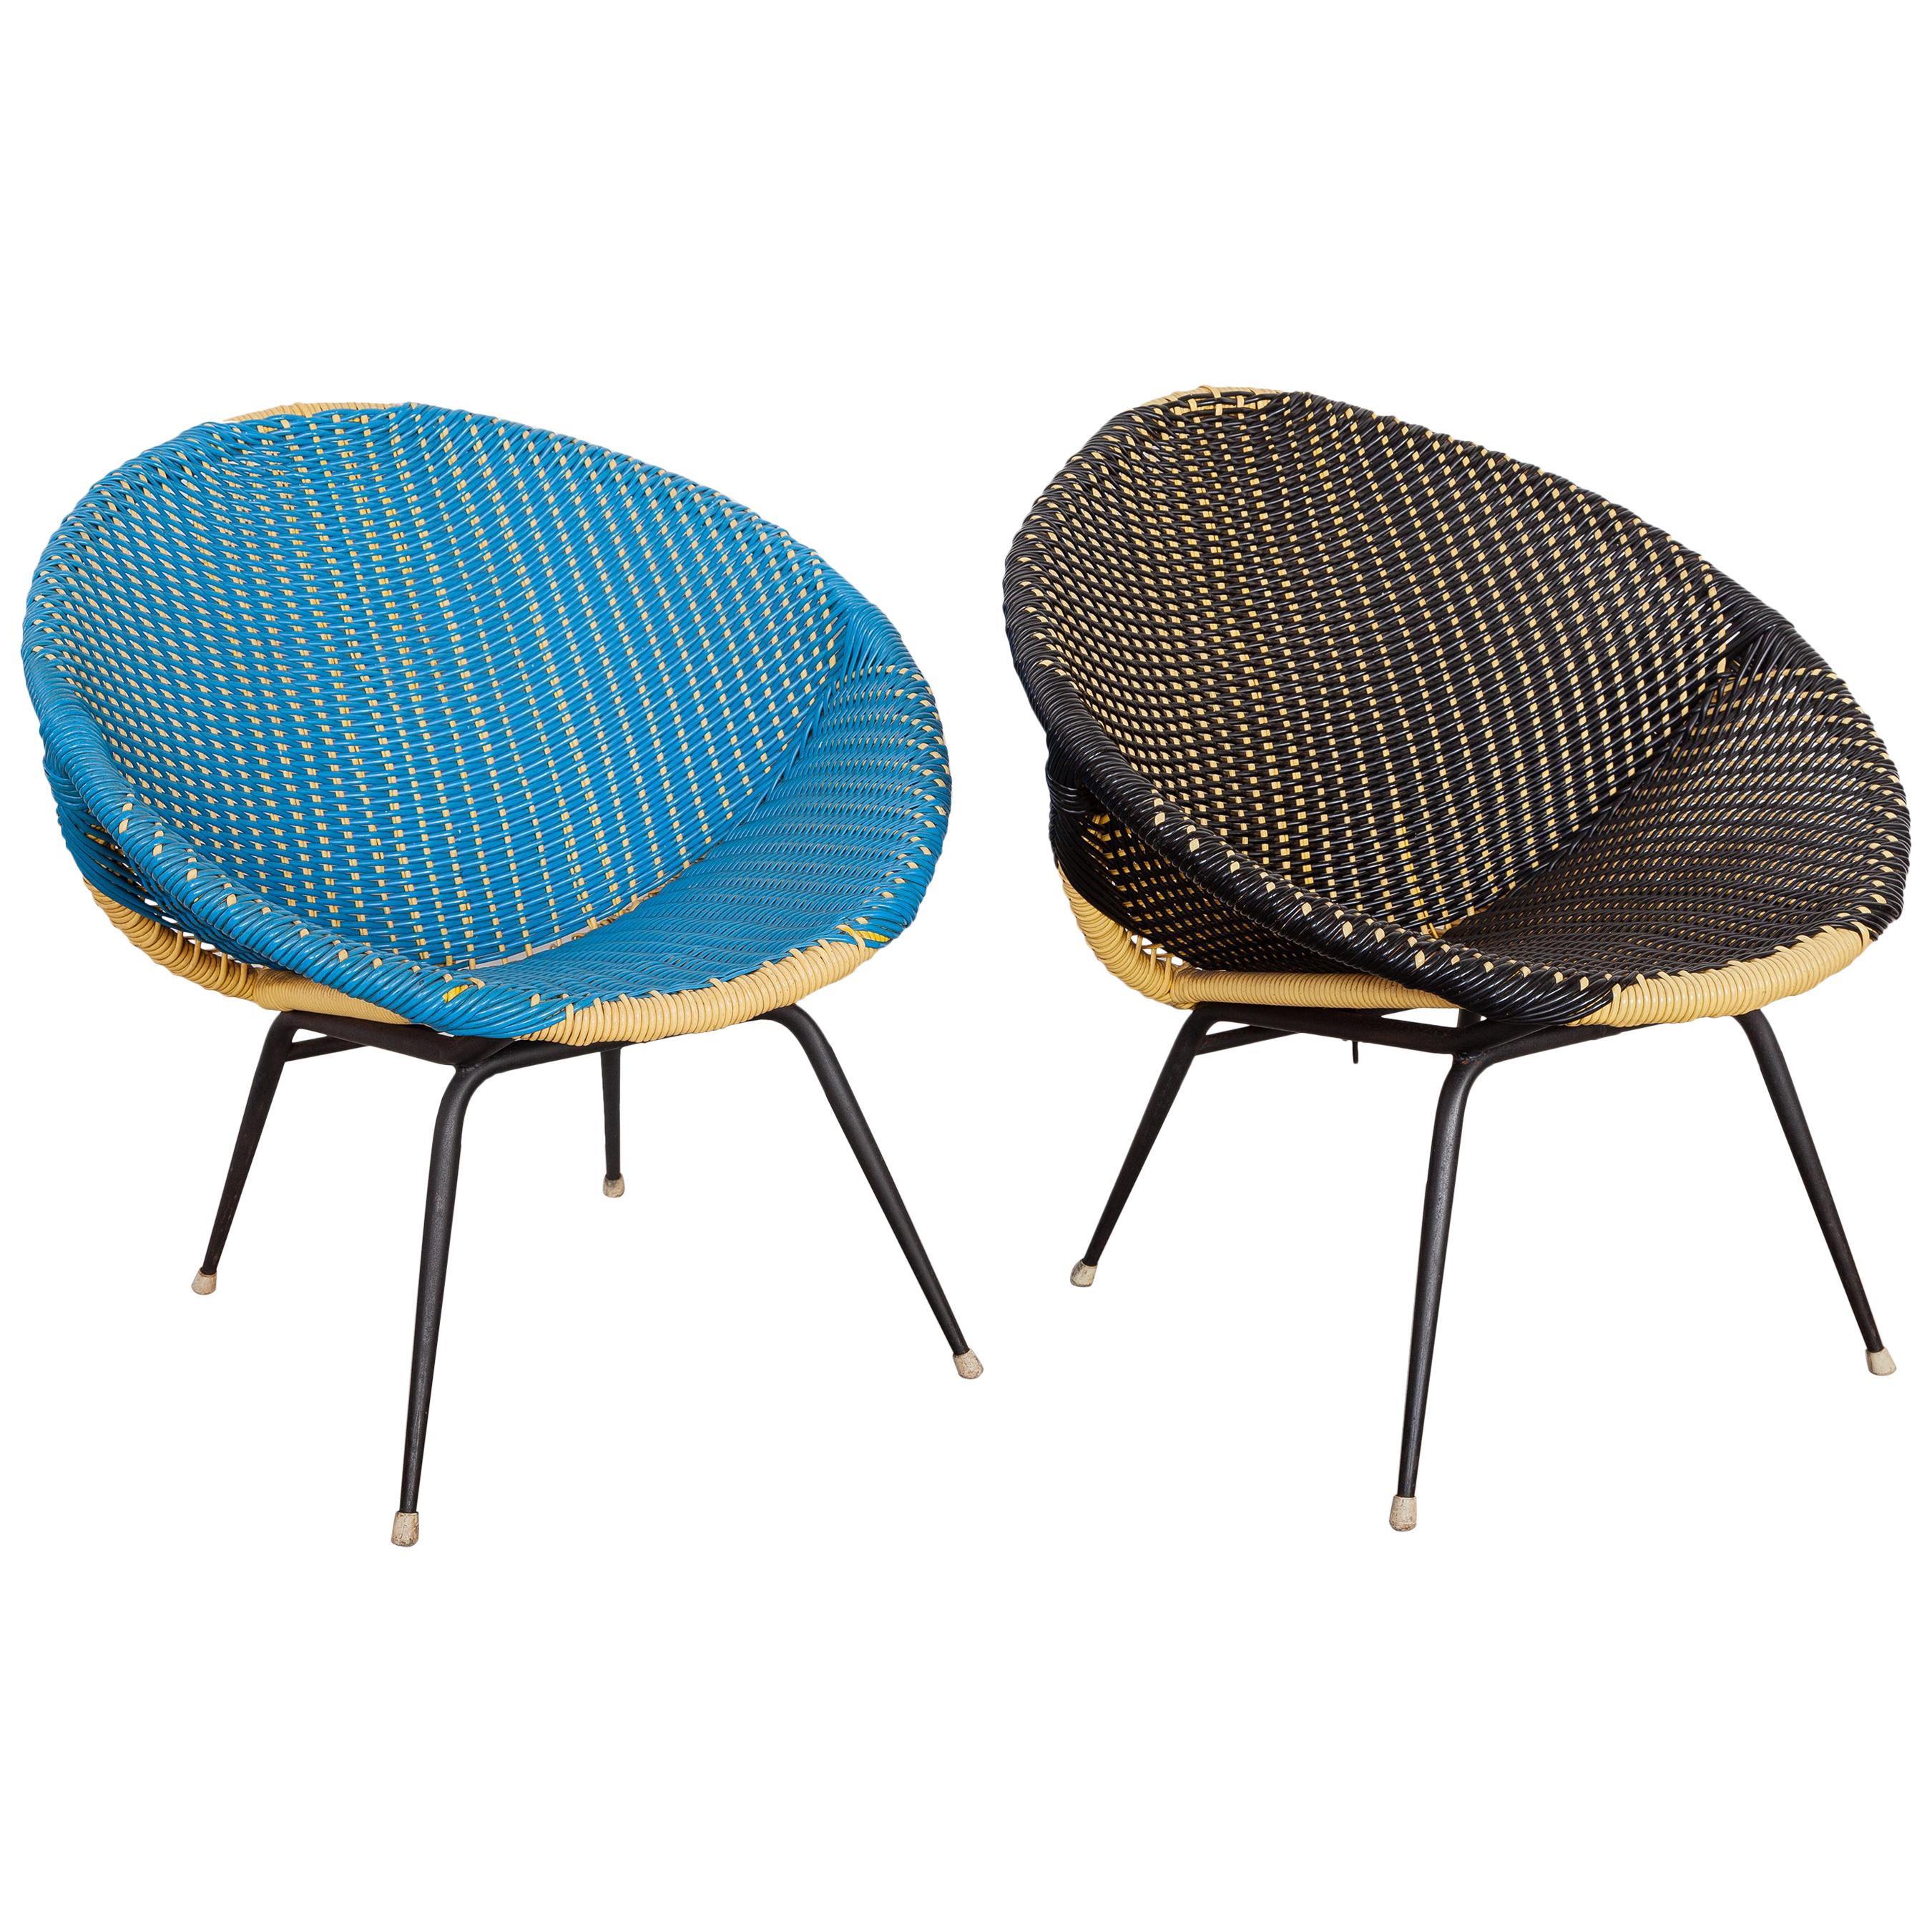 Set of Two Woven Plastic Wicker 1950s Bucket Chairs in Black and Blue